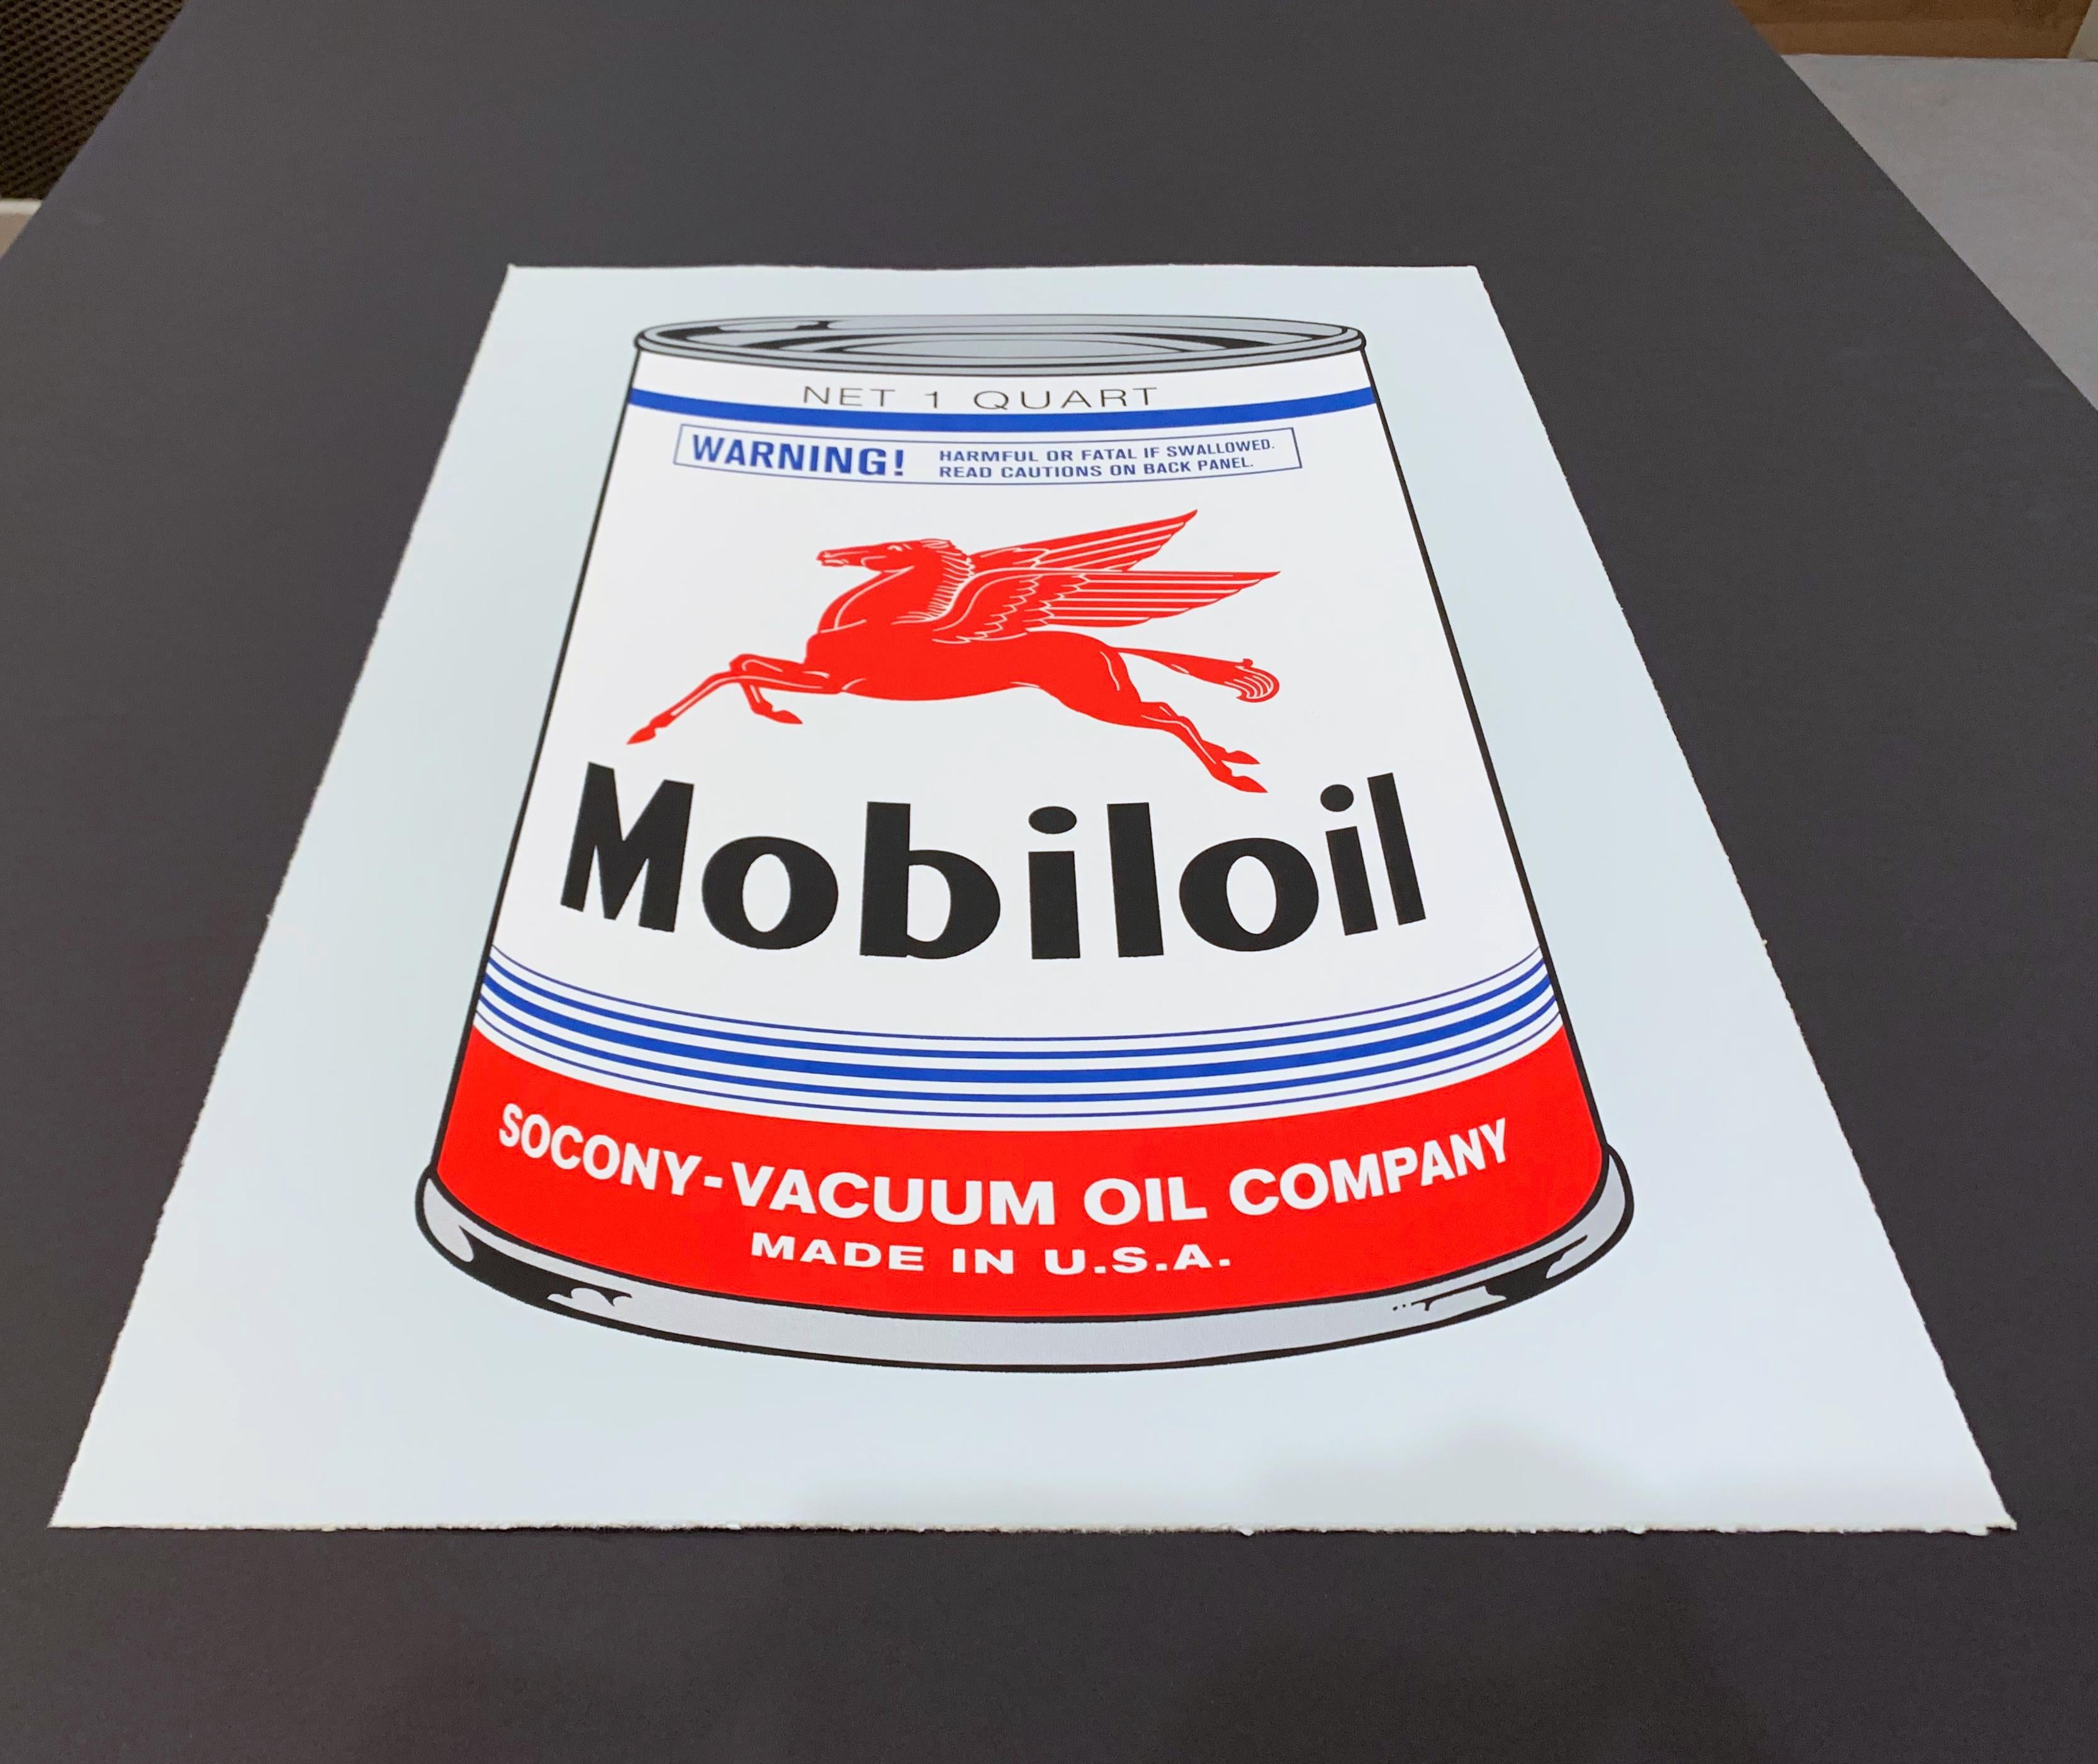 Artist: Heiner Meyer
Medium: Screenprint (multi-colored) on handmade paper
Title: Mobiloil
Portfolio: Masterpieces in Oils
Signed: Hand signed and numbered on reverse
Year: 2016
Edition: 45/60
Framed Size: 32 3/4